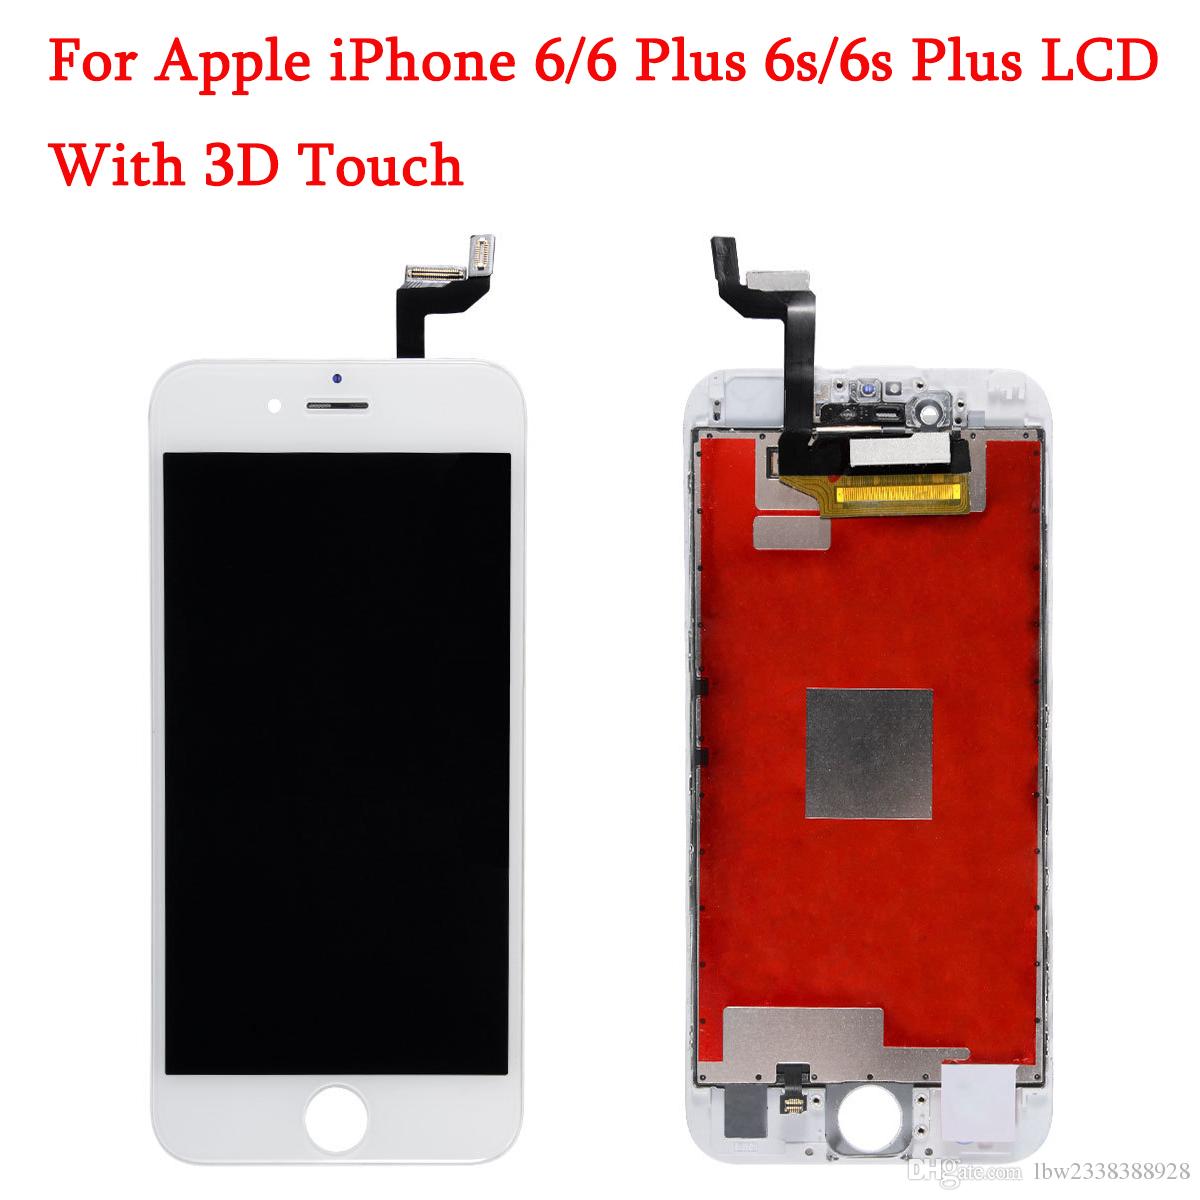 For iPhone 6/ 6 Plus 6s/ 6s Plus With 3D Touch LCD Display Touch Digitizer Complete Screen with Frame Full Assembly Replacement